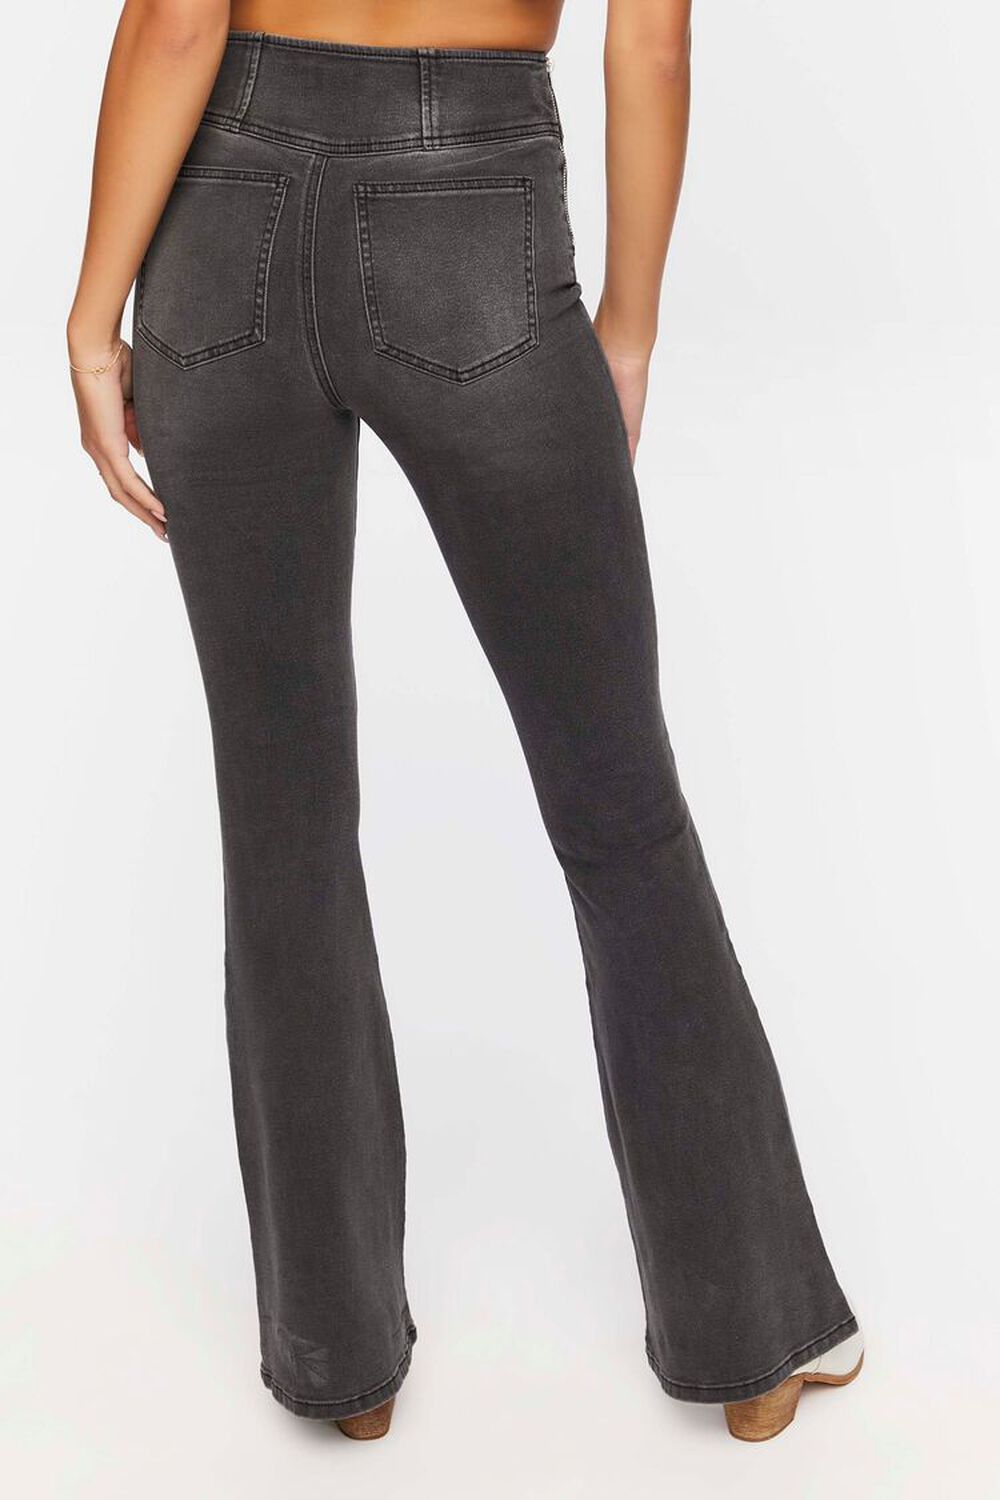 WASHED BLACK Embroidered High-Rise Flare Jeans, image 3